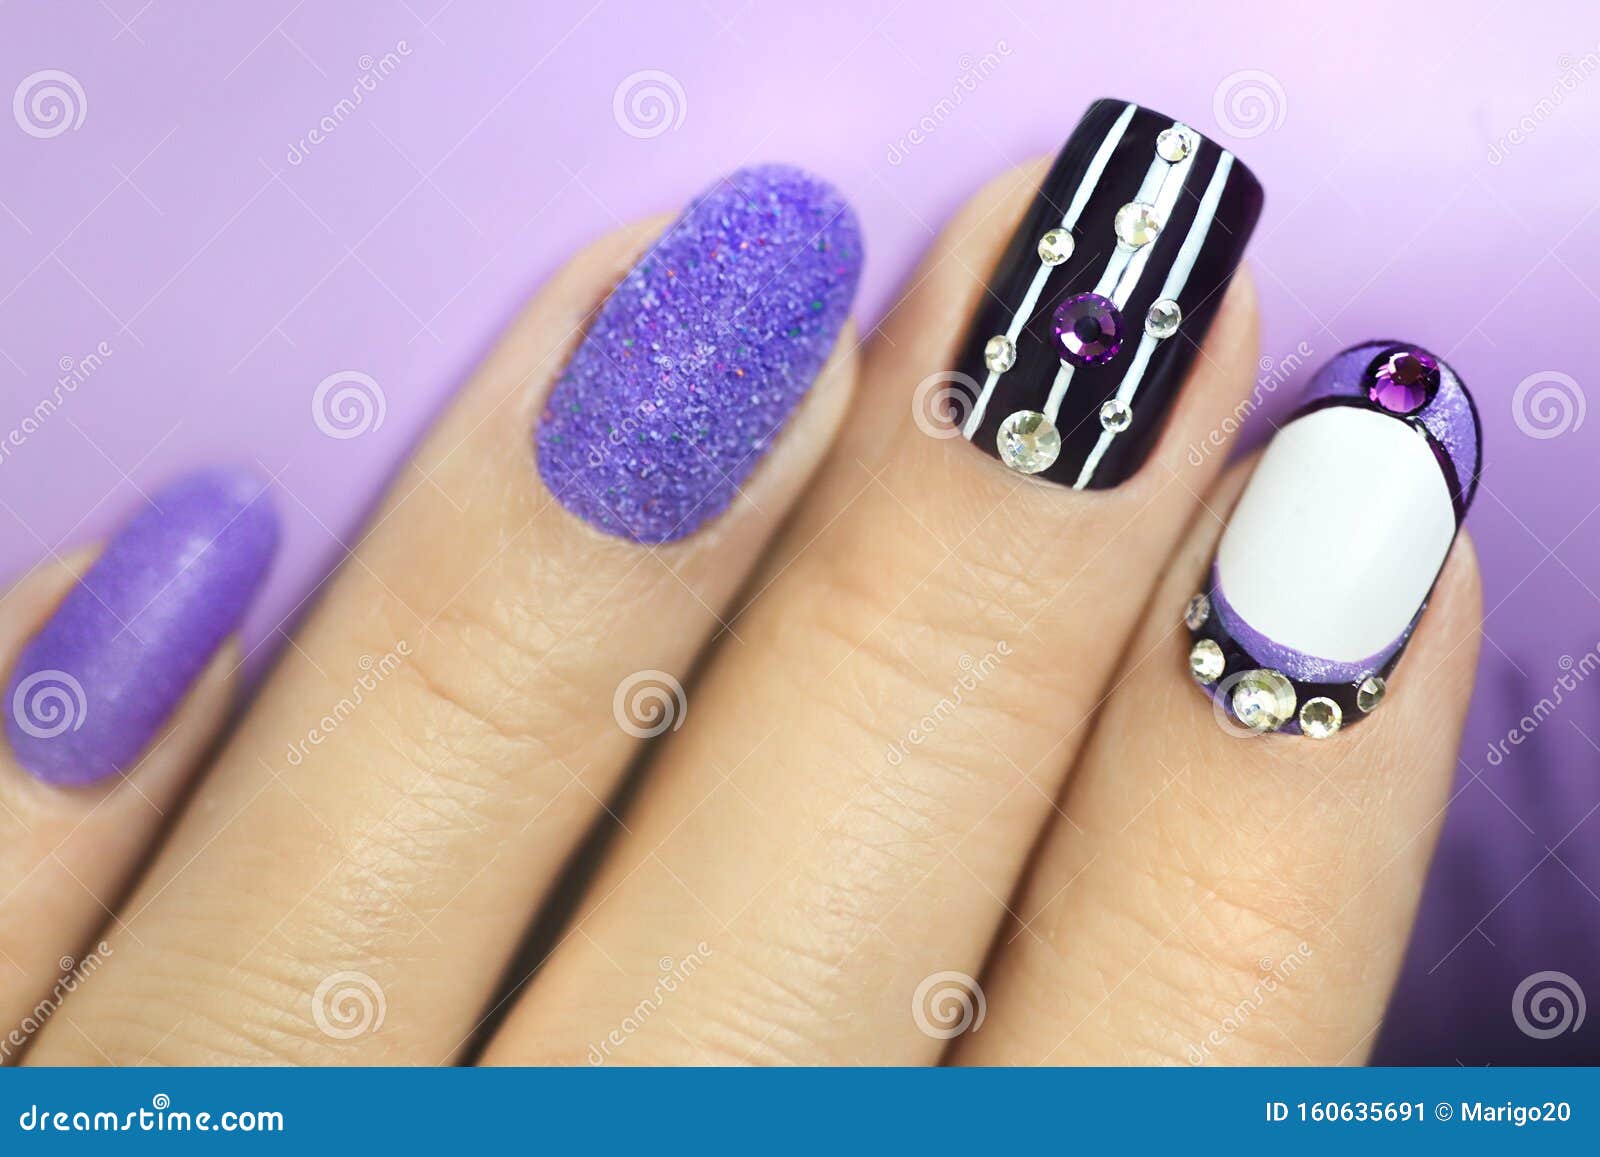 multi-colored manicure with white and lilac varnish on various forms of nails